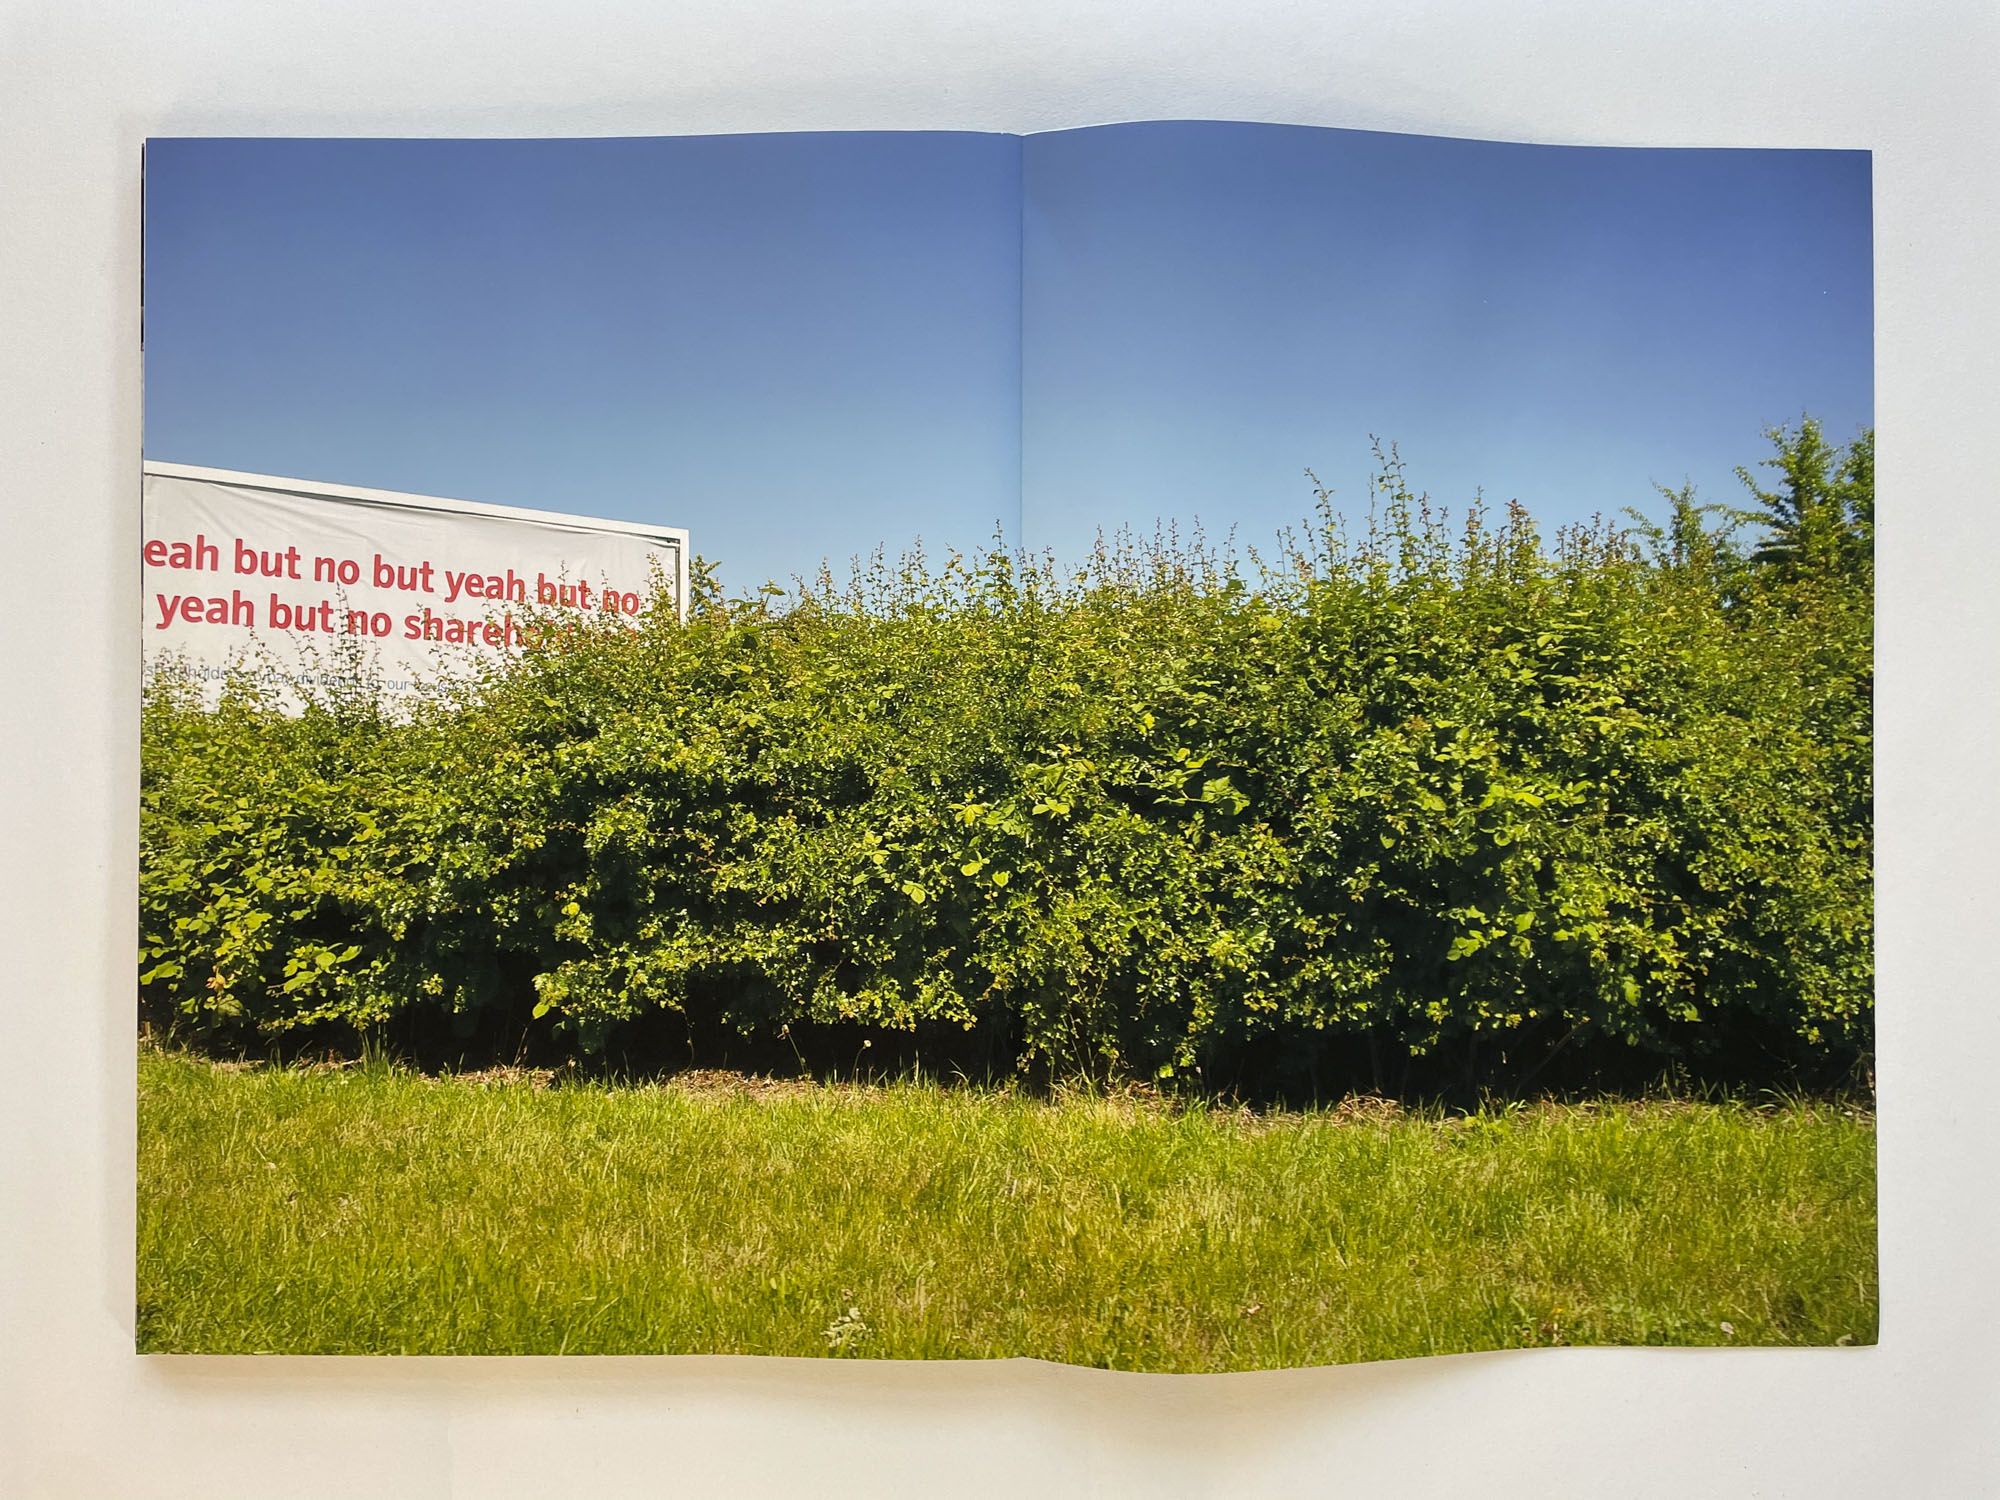 a green hedge and grass, a blue sky and part of a billboard that says yeah but no but yeah but no in large red letters